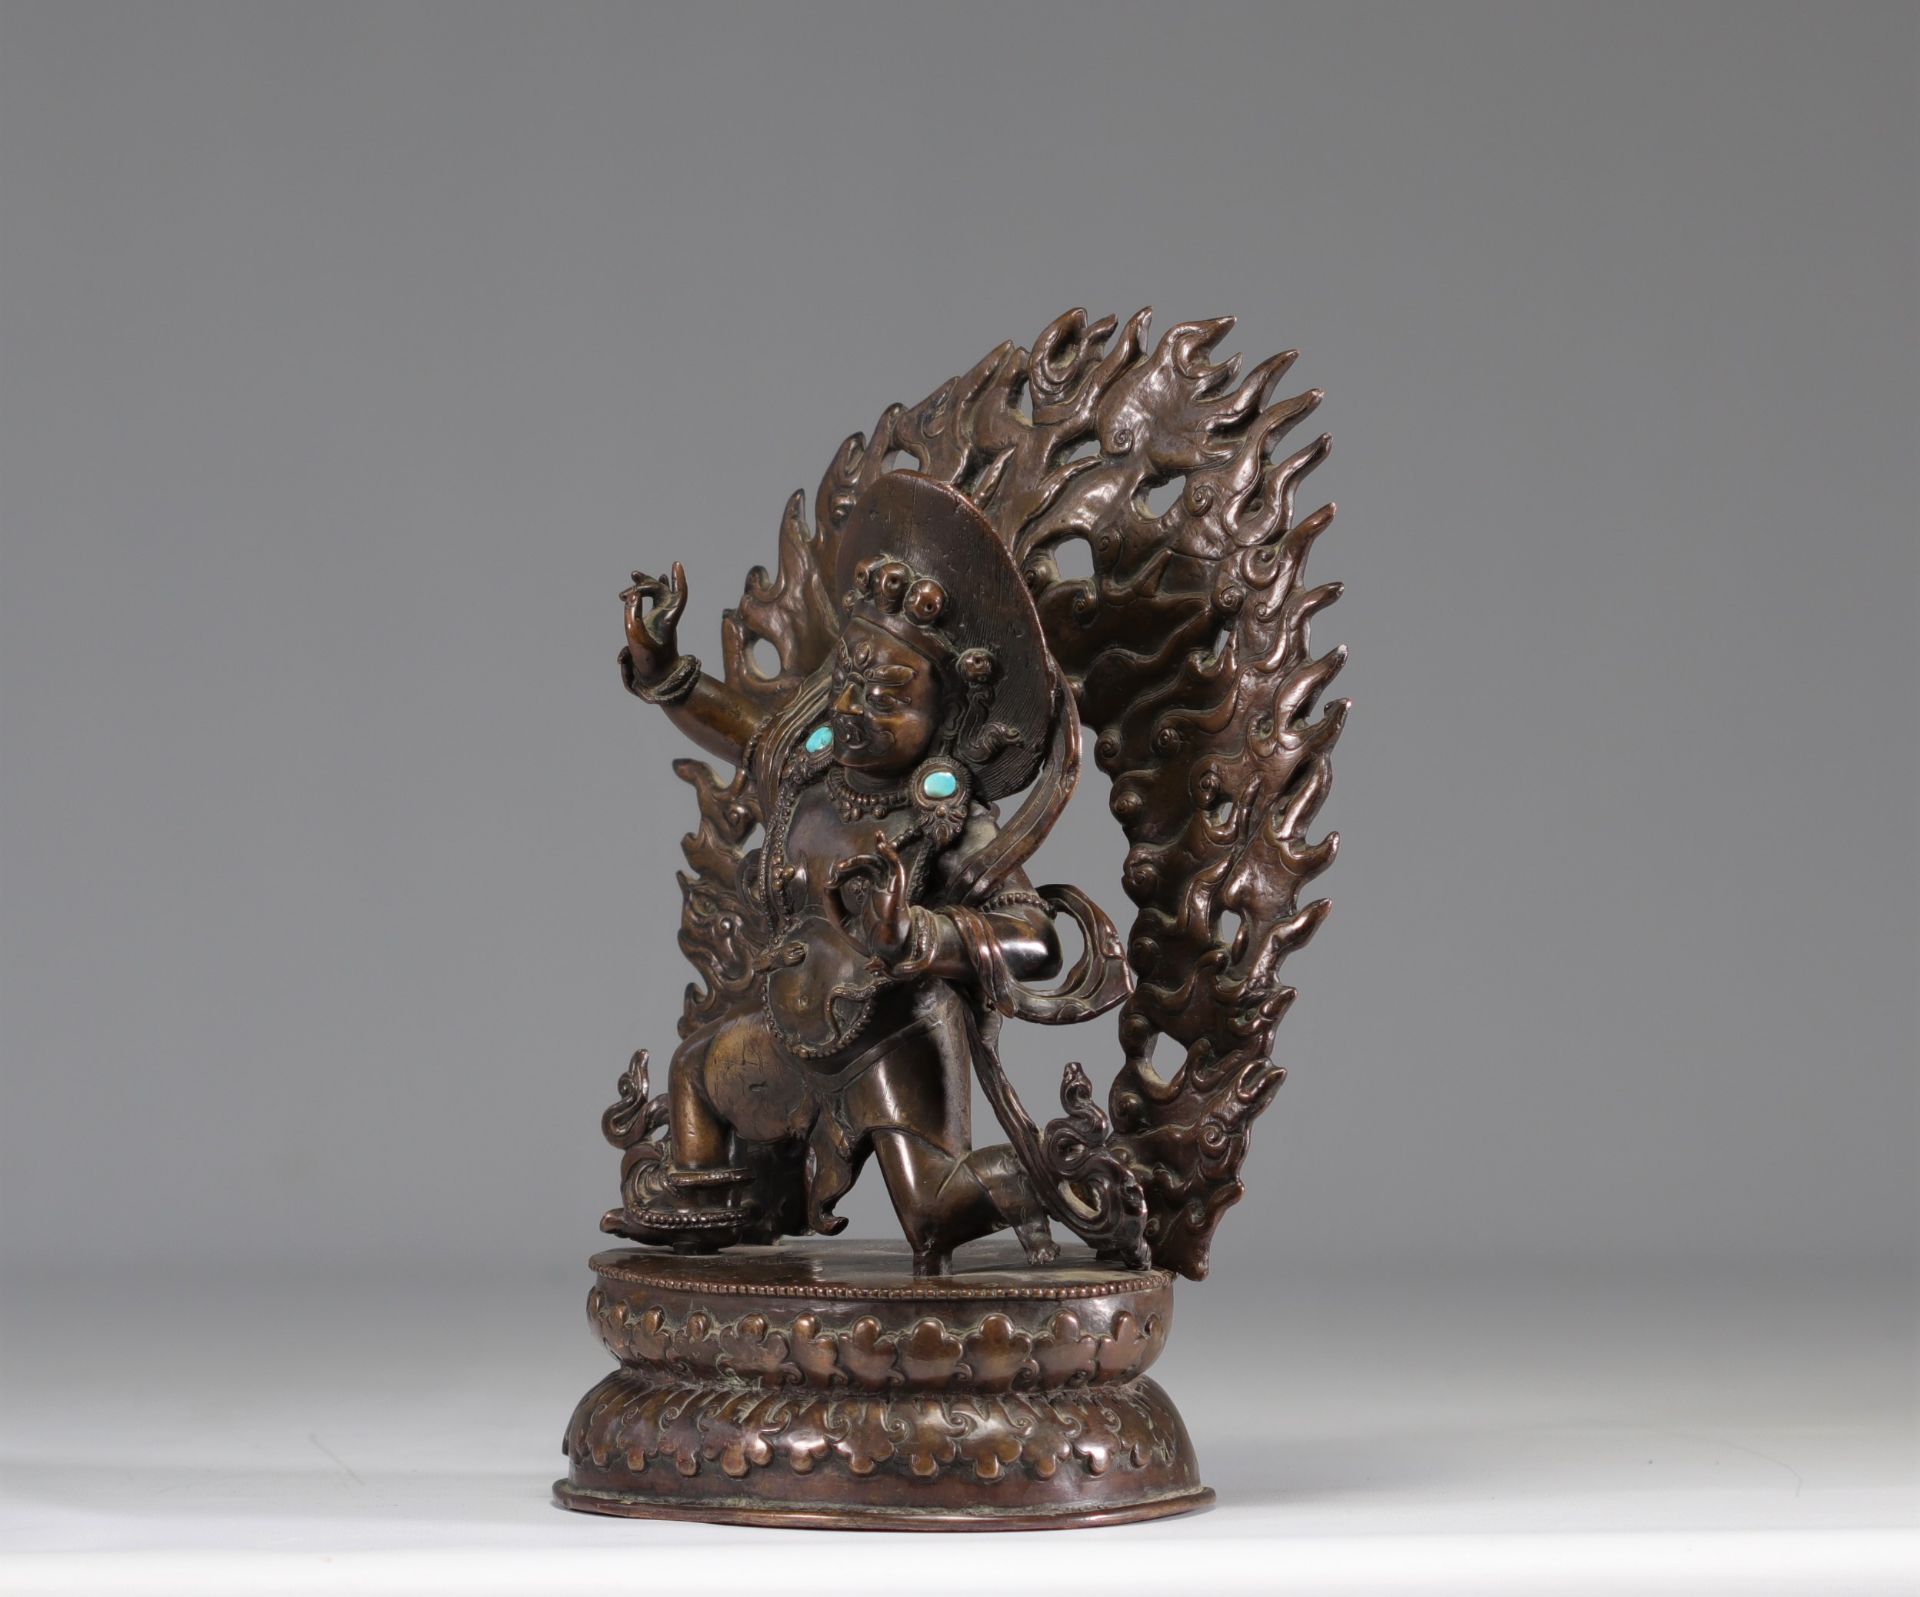 Large sculpture of a Tibetan divinity in bronze inlaid with turquoise, 18th century - Image 3 of 5